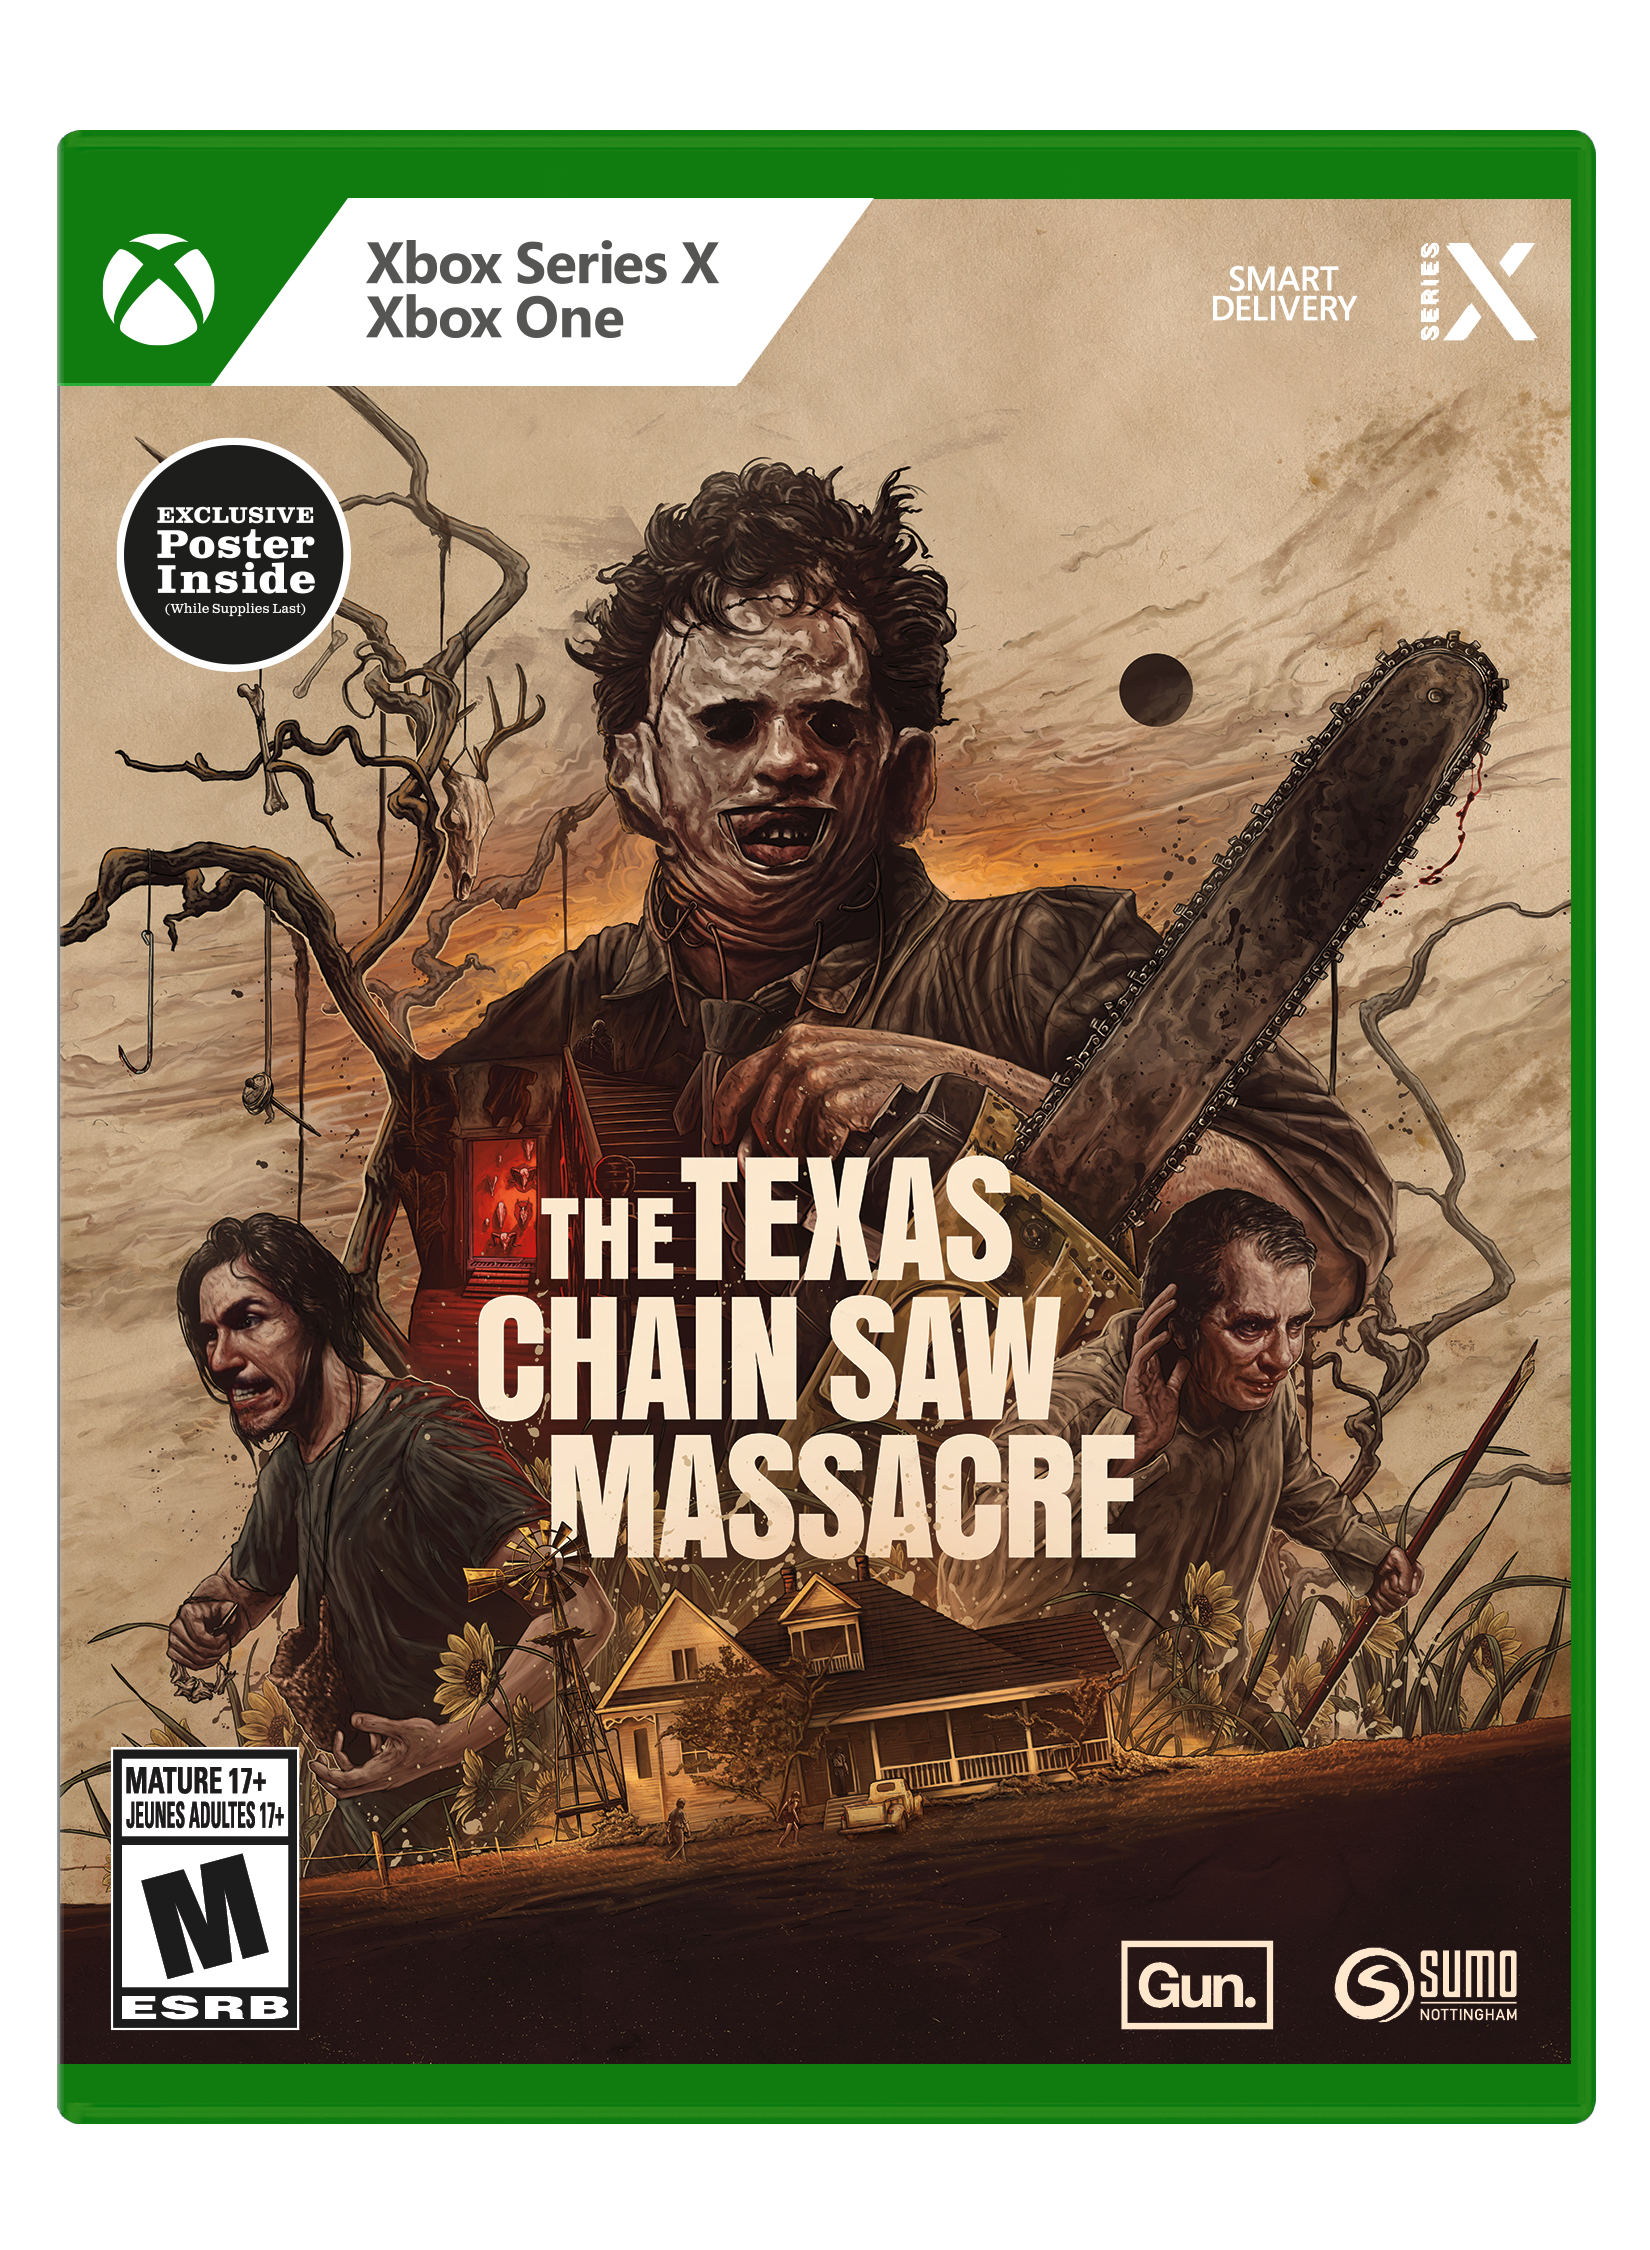 Jigsaw From Saw X Invites Xbox Fans To Solve Traps In A Game With  Consequences - Xbox Wire